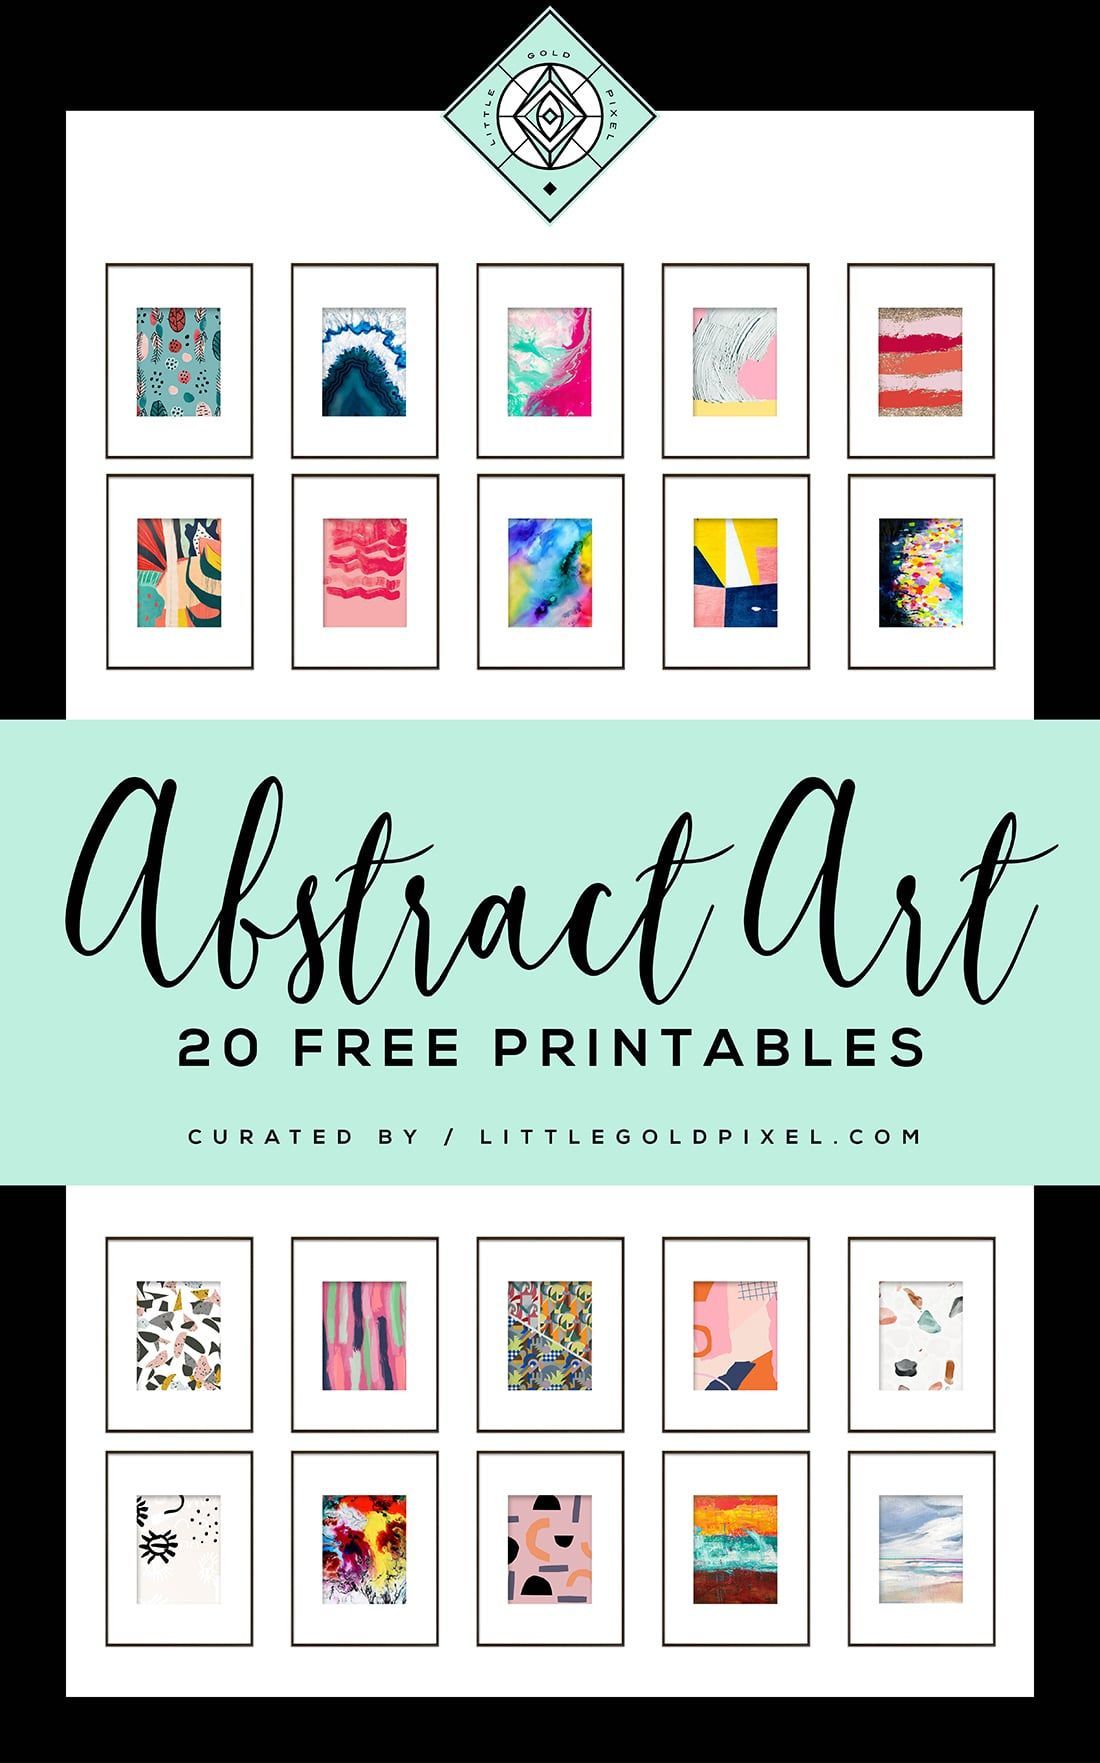 20 Free Abstract Art Printables for Your Gallery Walls • Little Gold Pixel - 20 Free Abstract Art Printables for Your Gallery Walls • Little Gold Pixel -   18 diy Art prints ideas